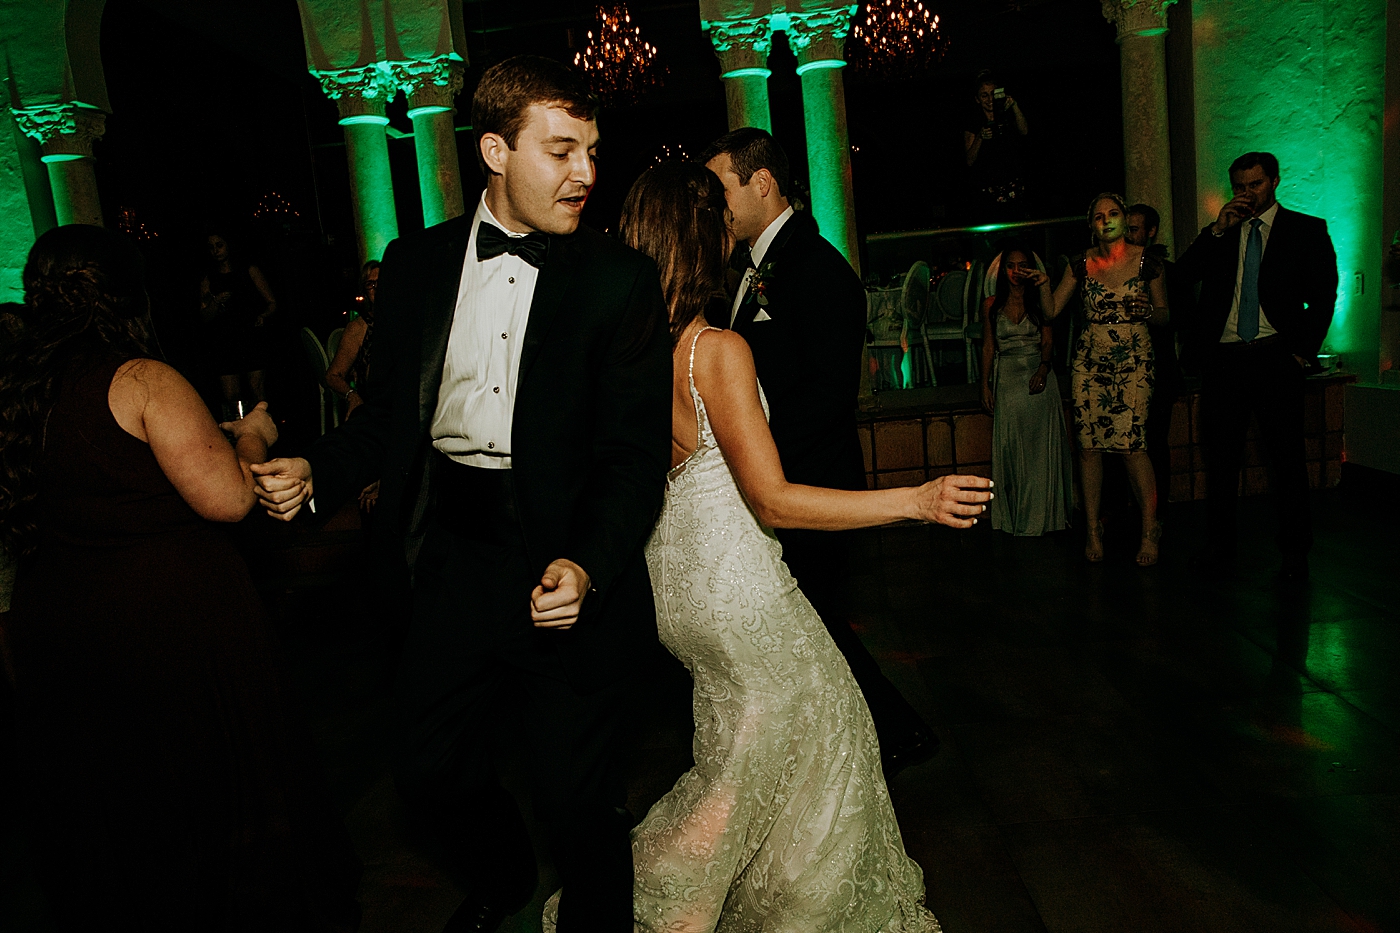 Candid dancing at Reception Coral Gables Country Club Wedding Photography captured by South Florida Wedding Photographer Maggie Alvarez Photography